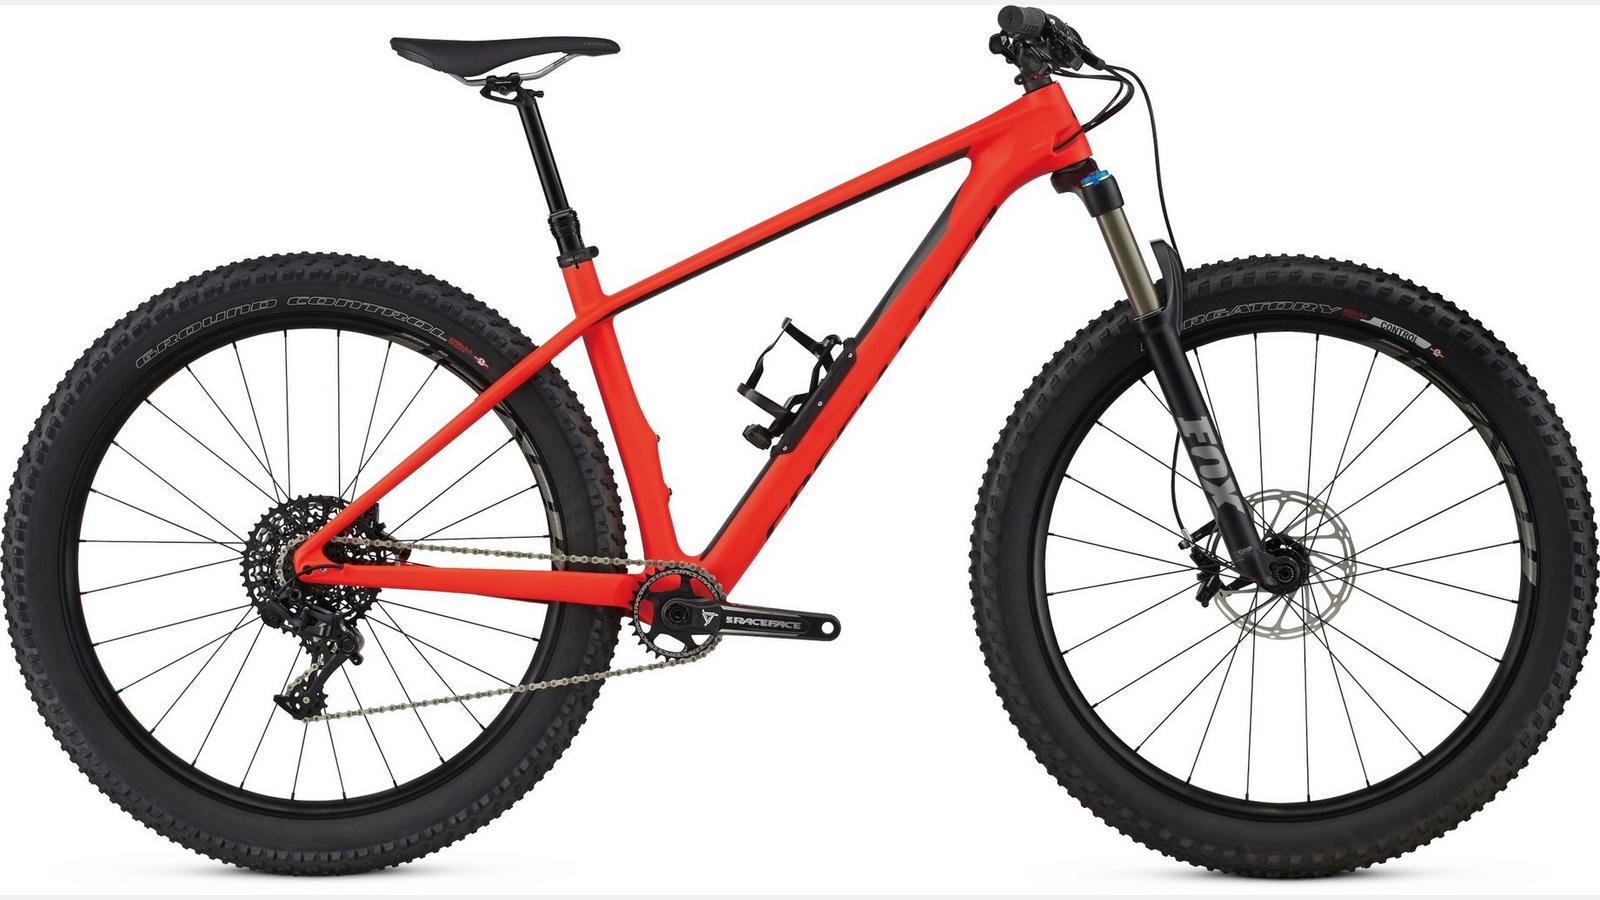 Touch-up paint for 2018 Specialized Fuse Expert Carbon 6Fattie/29 - Satin Rocket Red